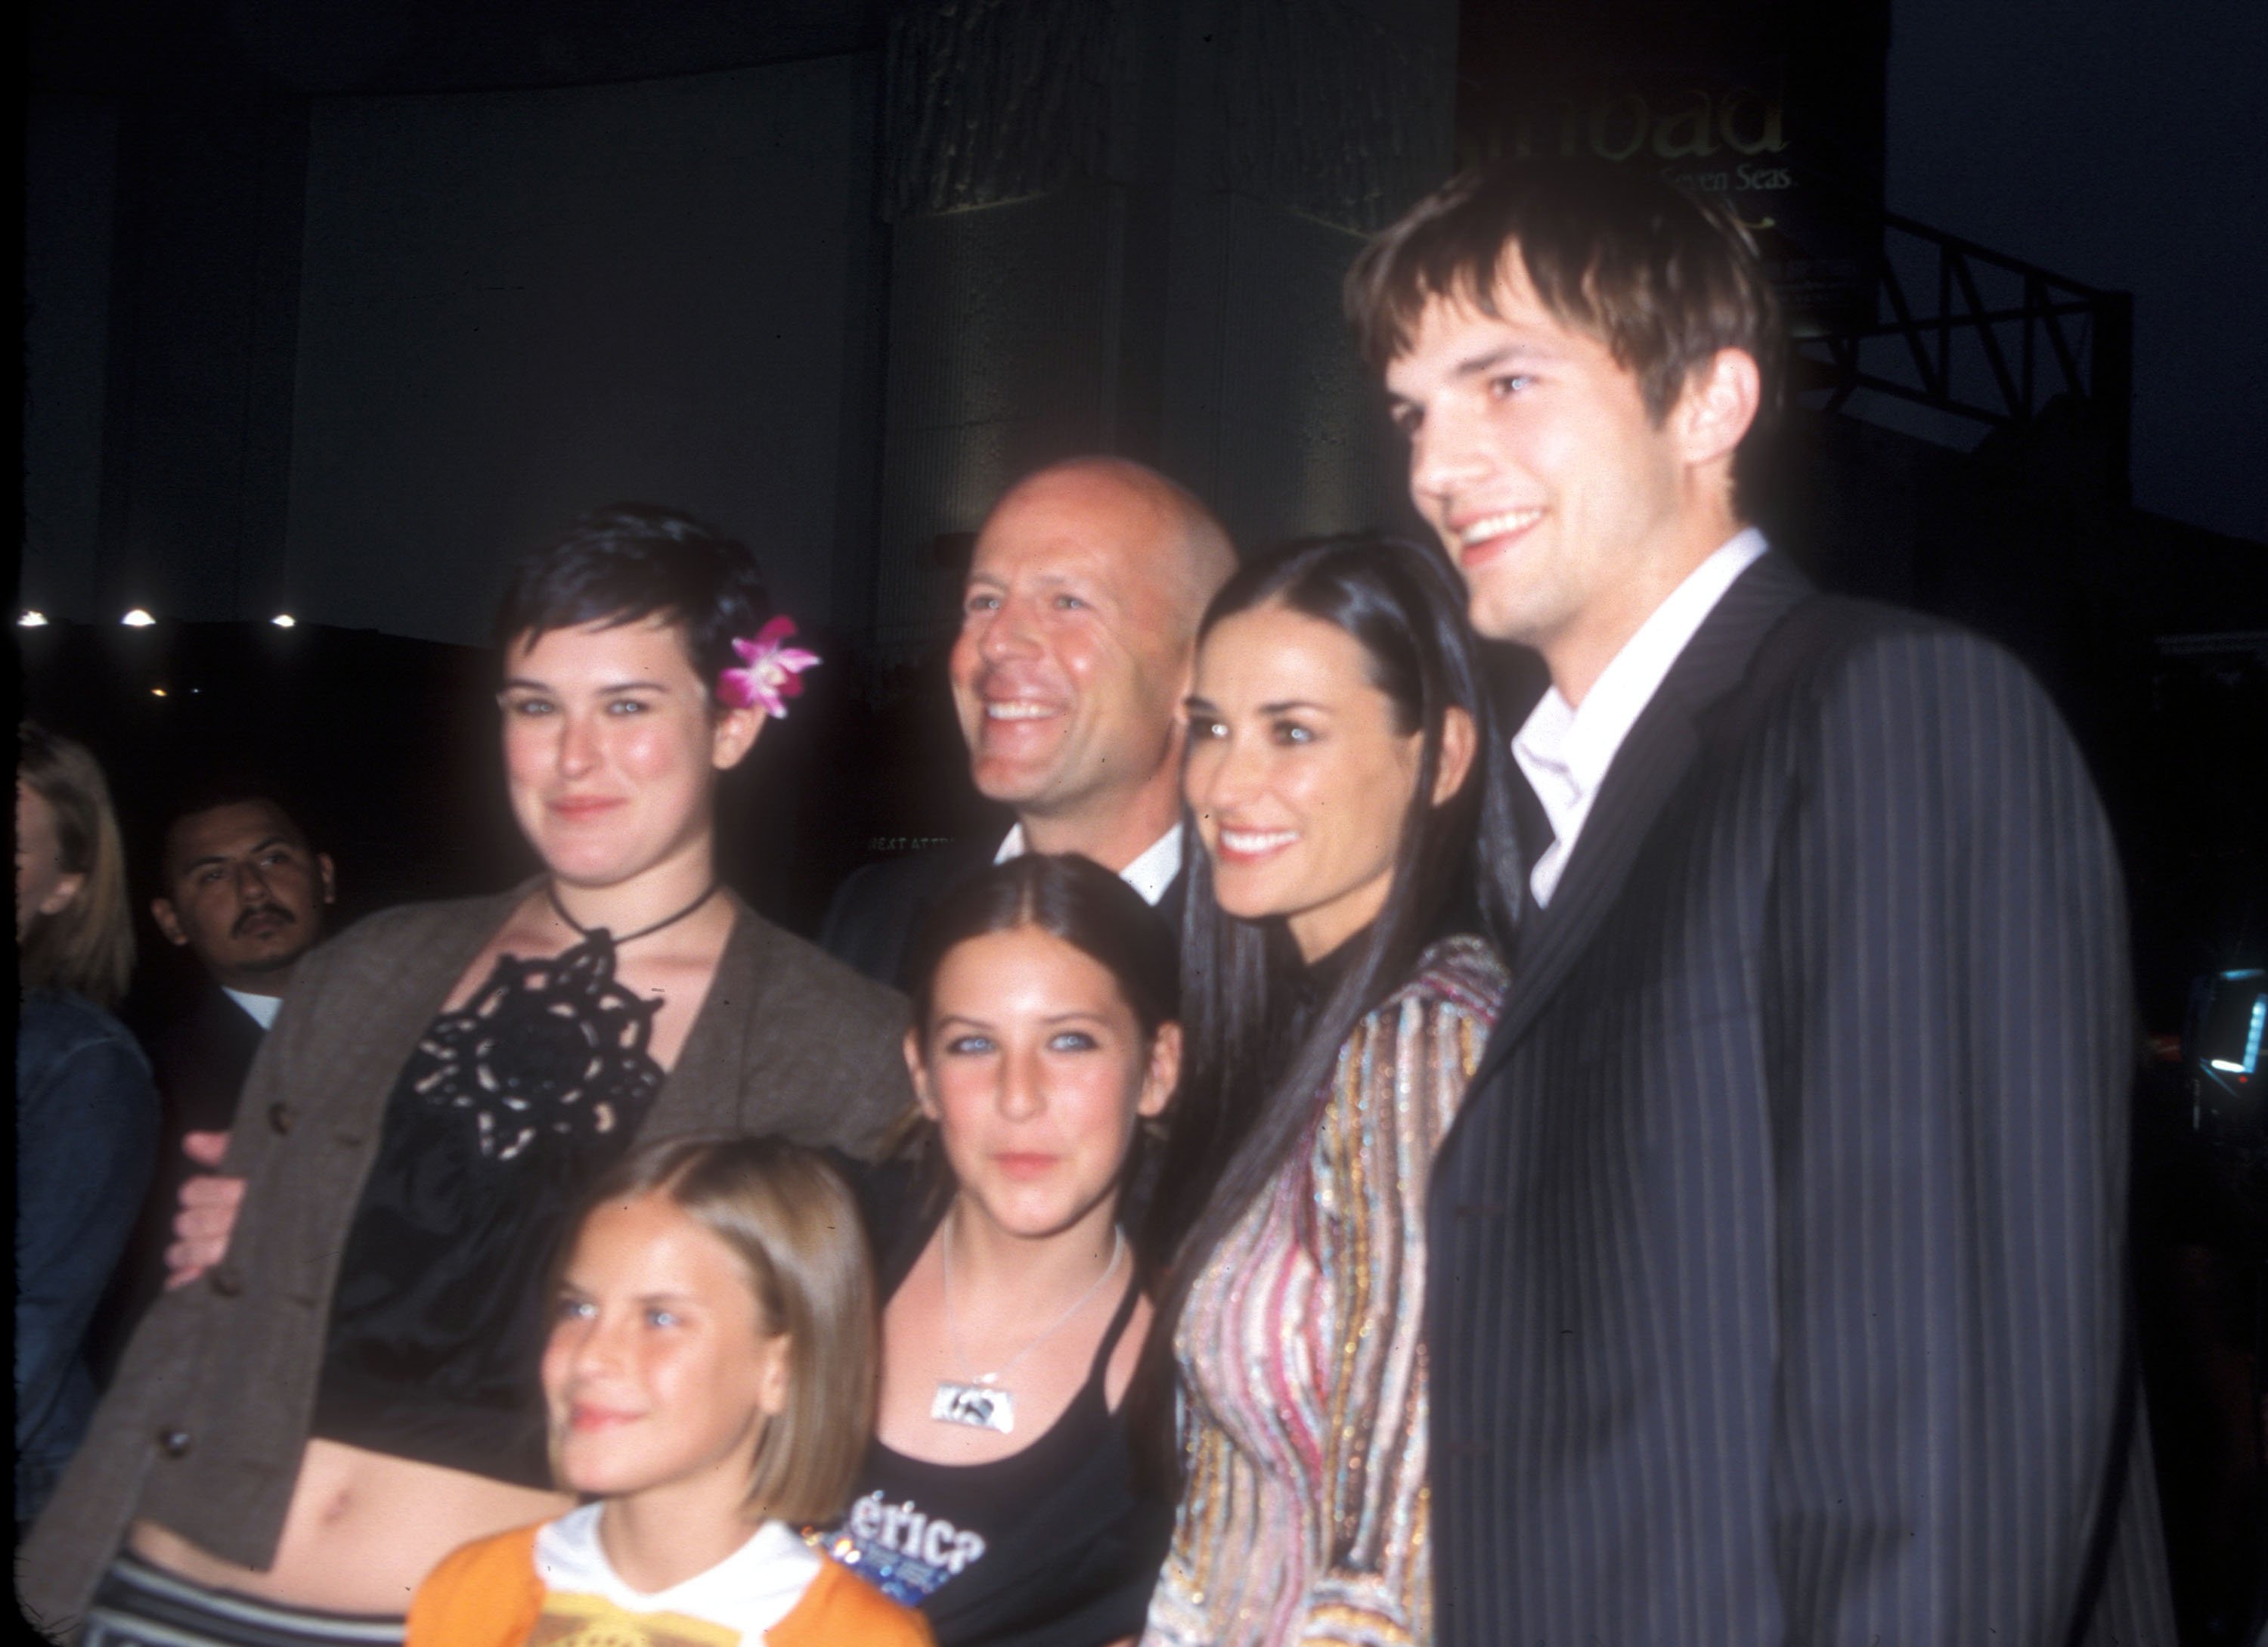 Bruce Willis, Demi Moore, their children, and Ashton Kutcher at the "Charlie's Angels 2 - Full Throttle" premiere on June 18, 2003. | Source: Getty Images